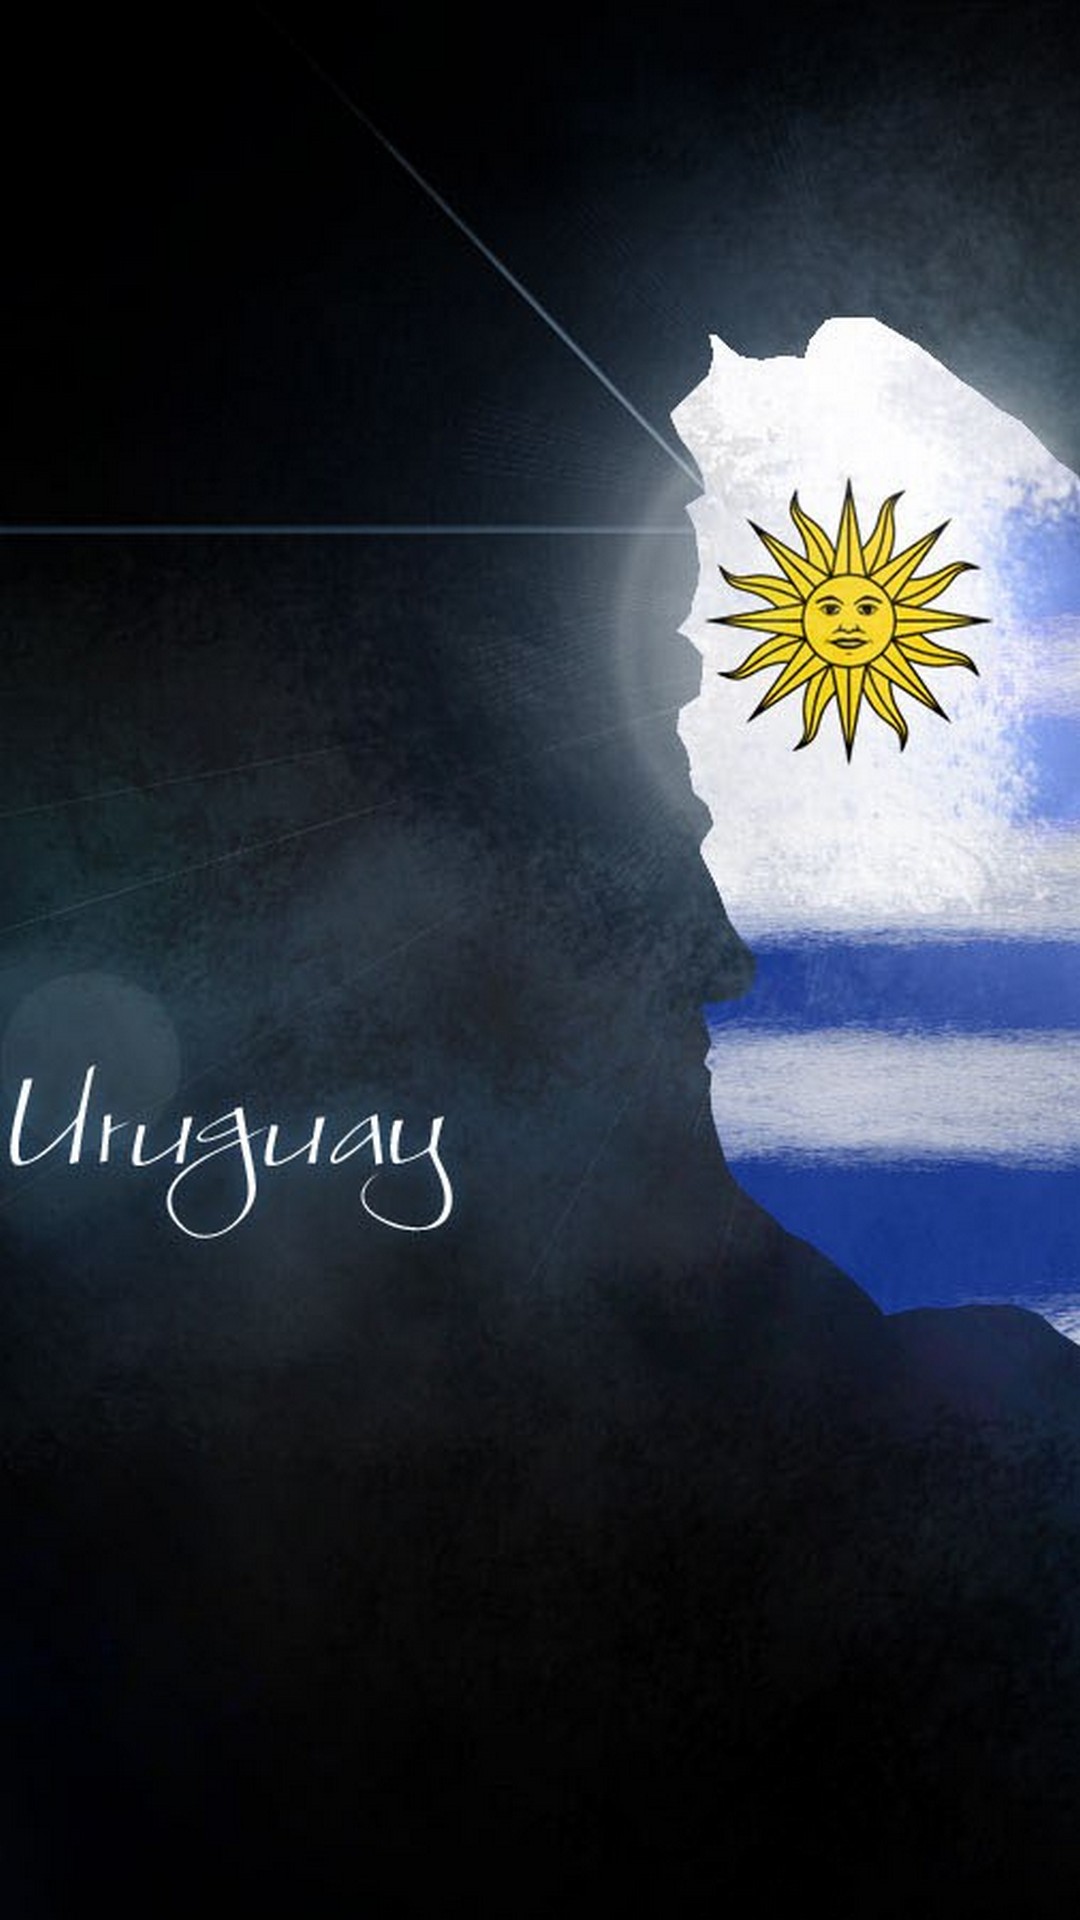 Uruguay National Team HD Wallpapers For Android with resolution 1080X1920 pixel. You can make this wallpaper for your Android backgrounds, Tablet, Smartphones Screensavers and Mobile Phone Lock Screen